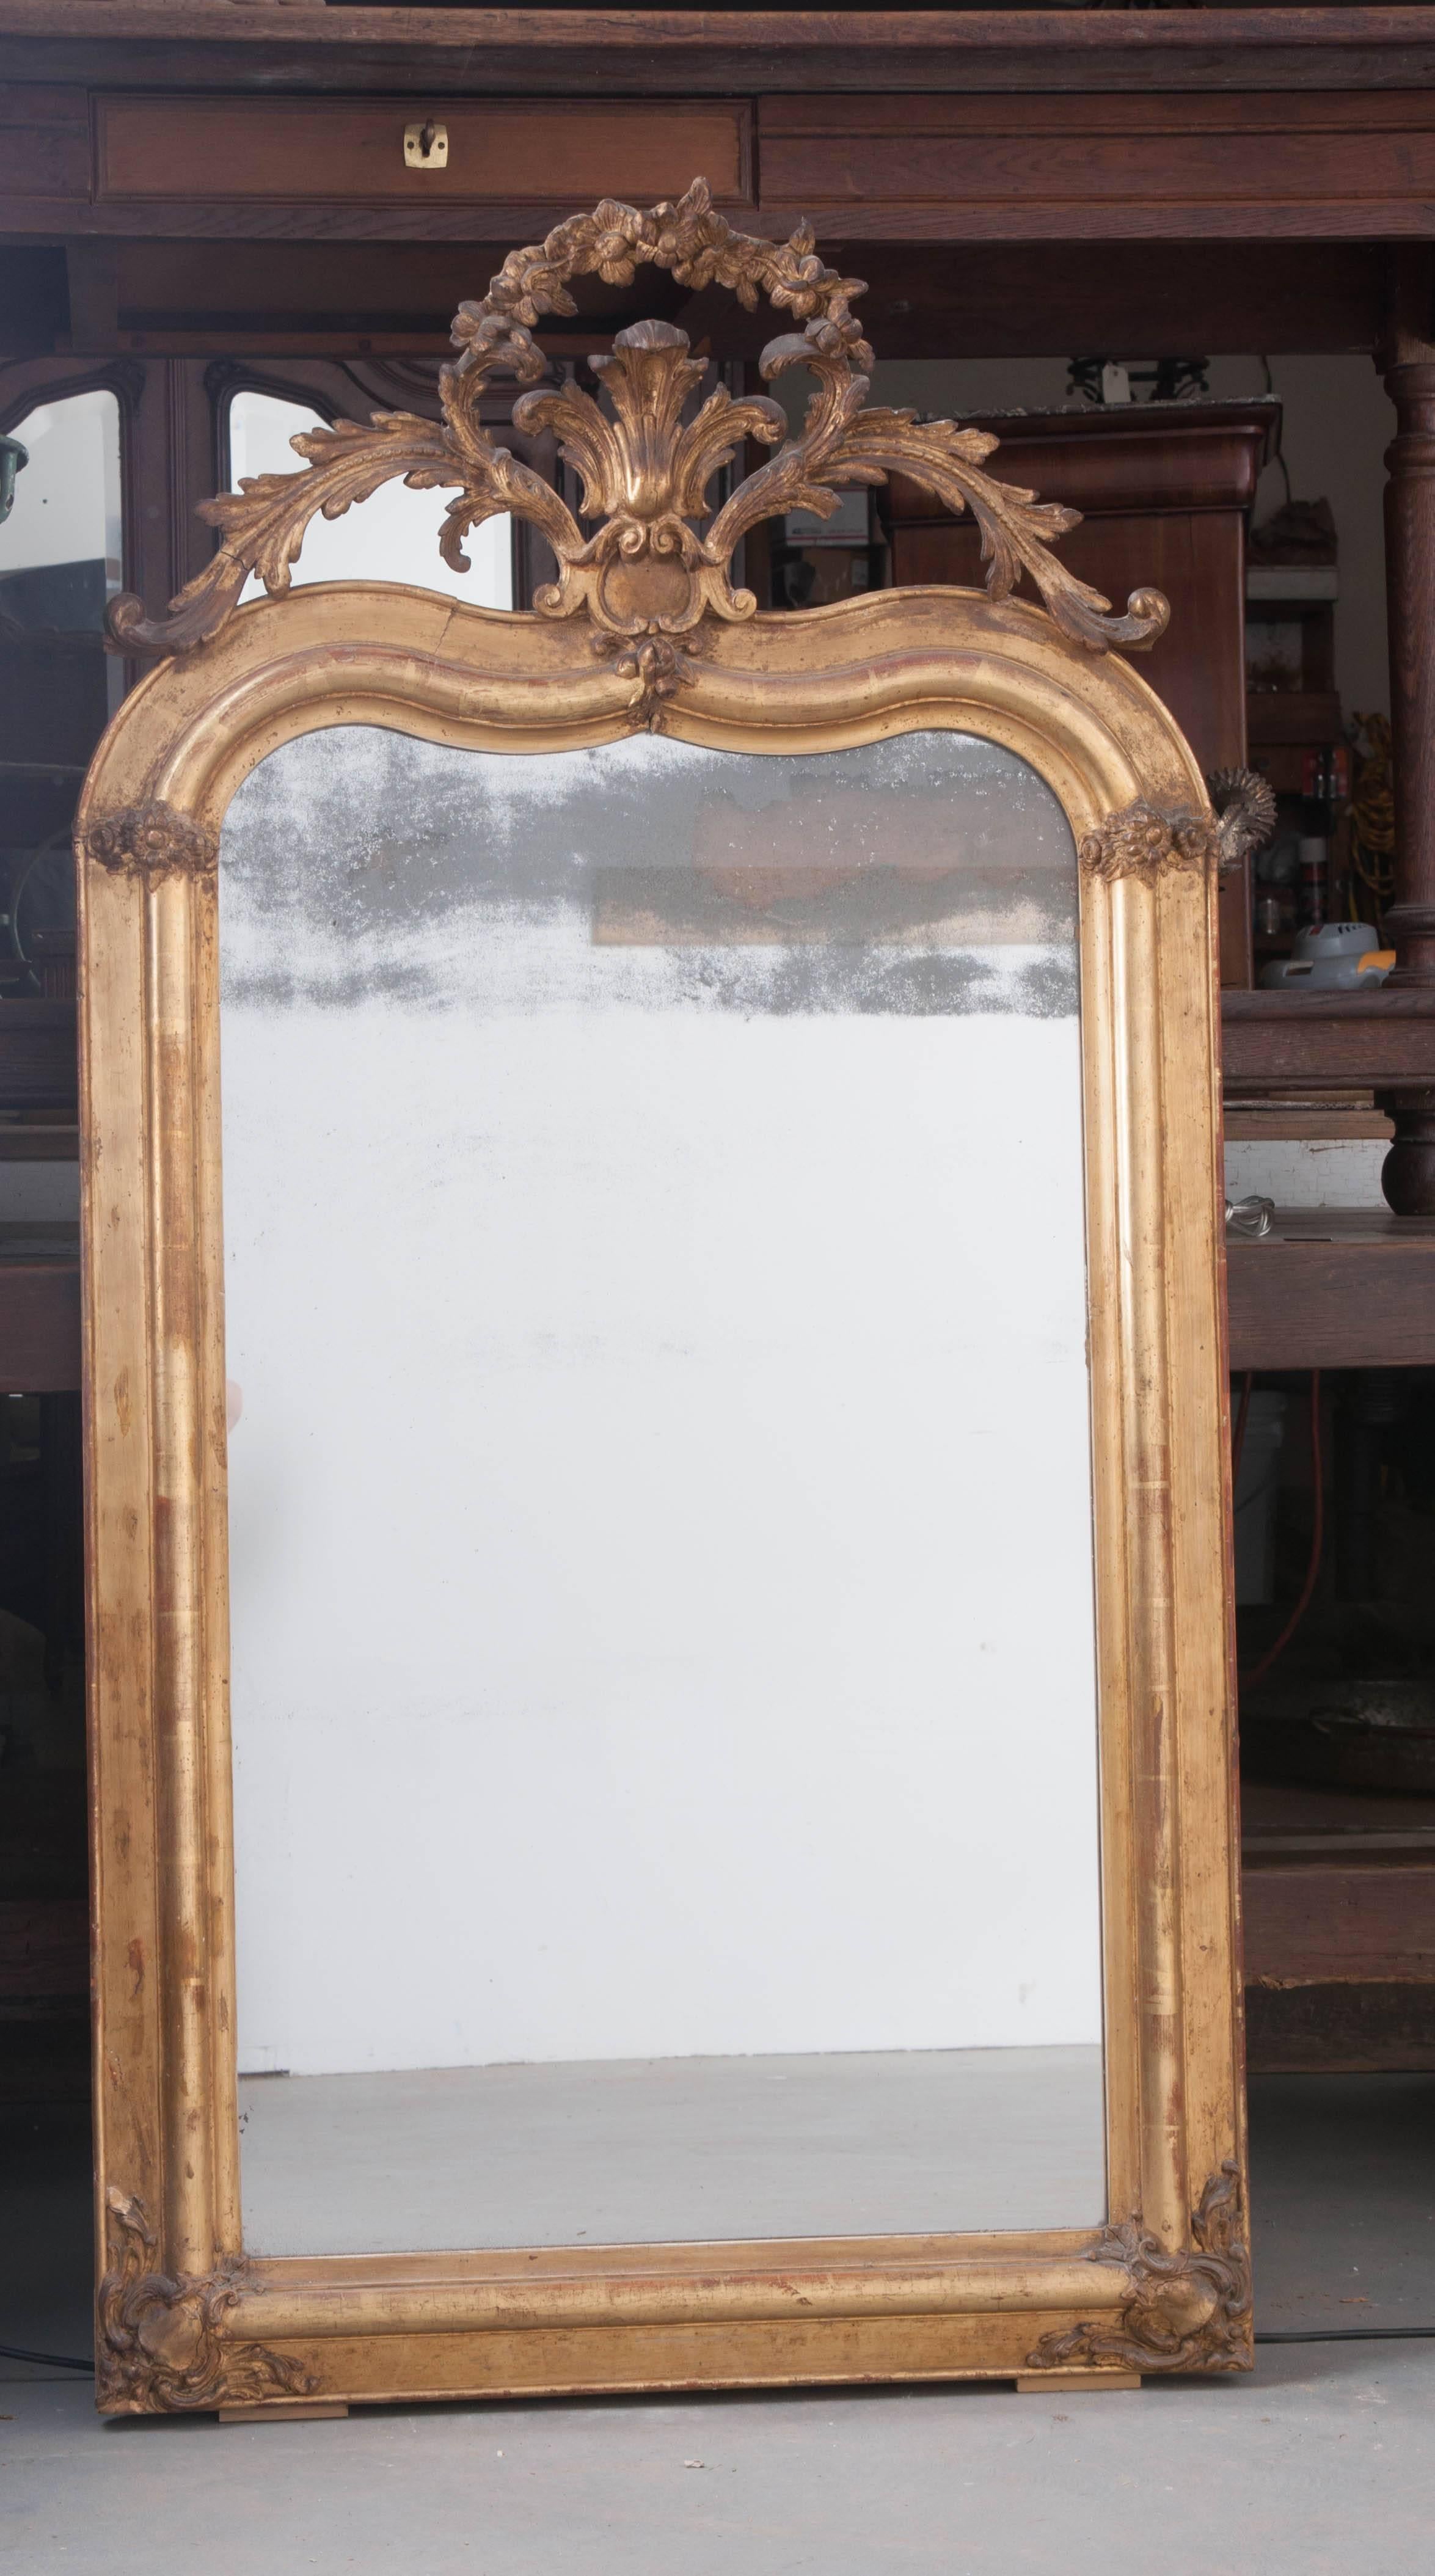 This stately mirror is finished in brilliant gold gilt and features a cartouche that is second to none! Made in France, circa 1870, this beautiful mirror has an ogee top upon which the impressive cartouche sits. It is made up of a central splay of